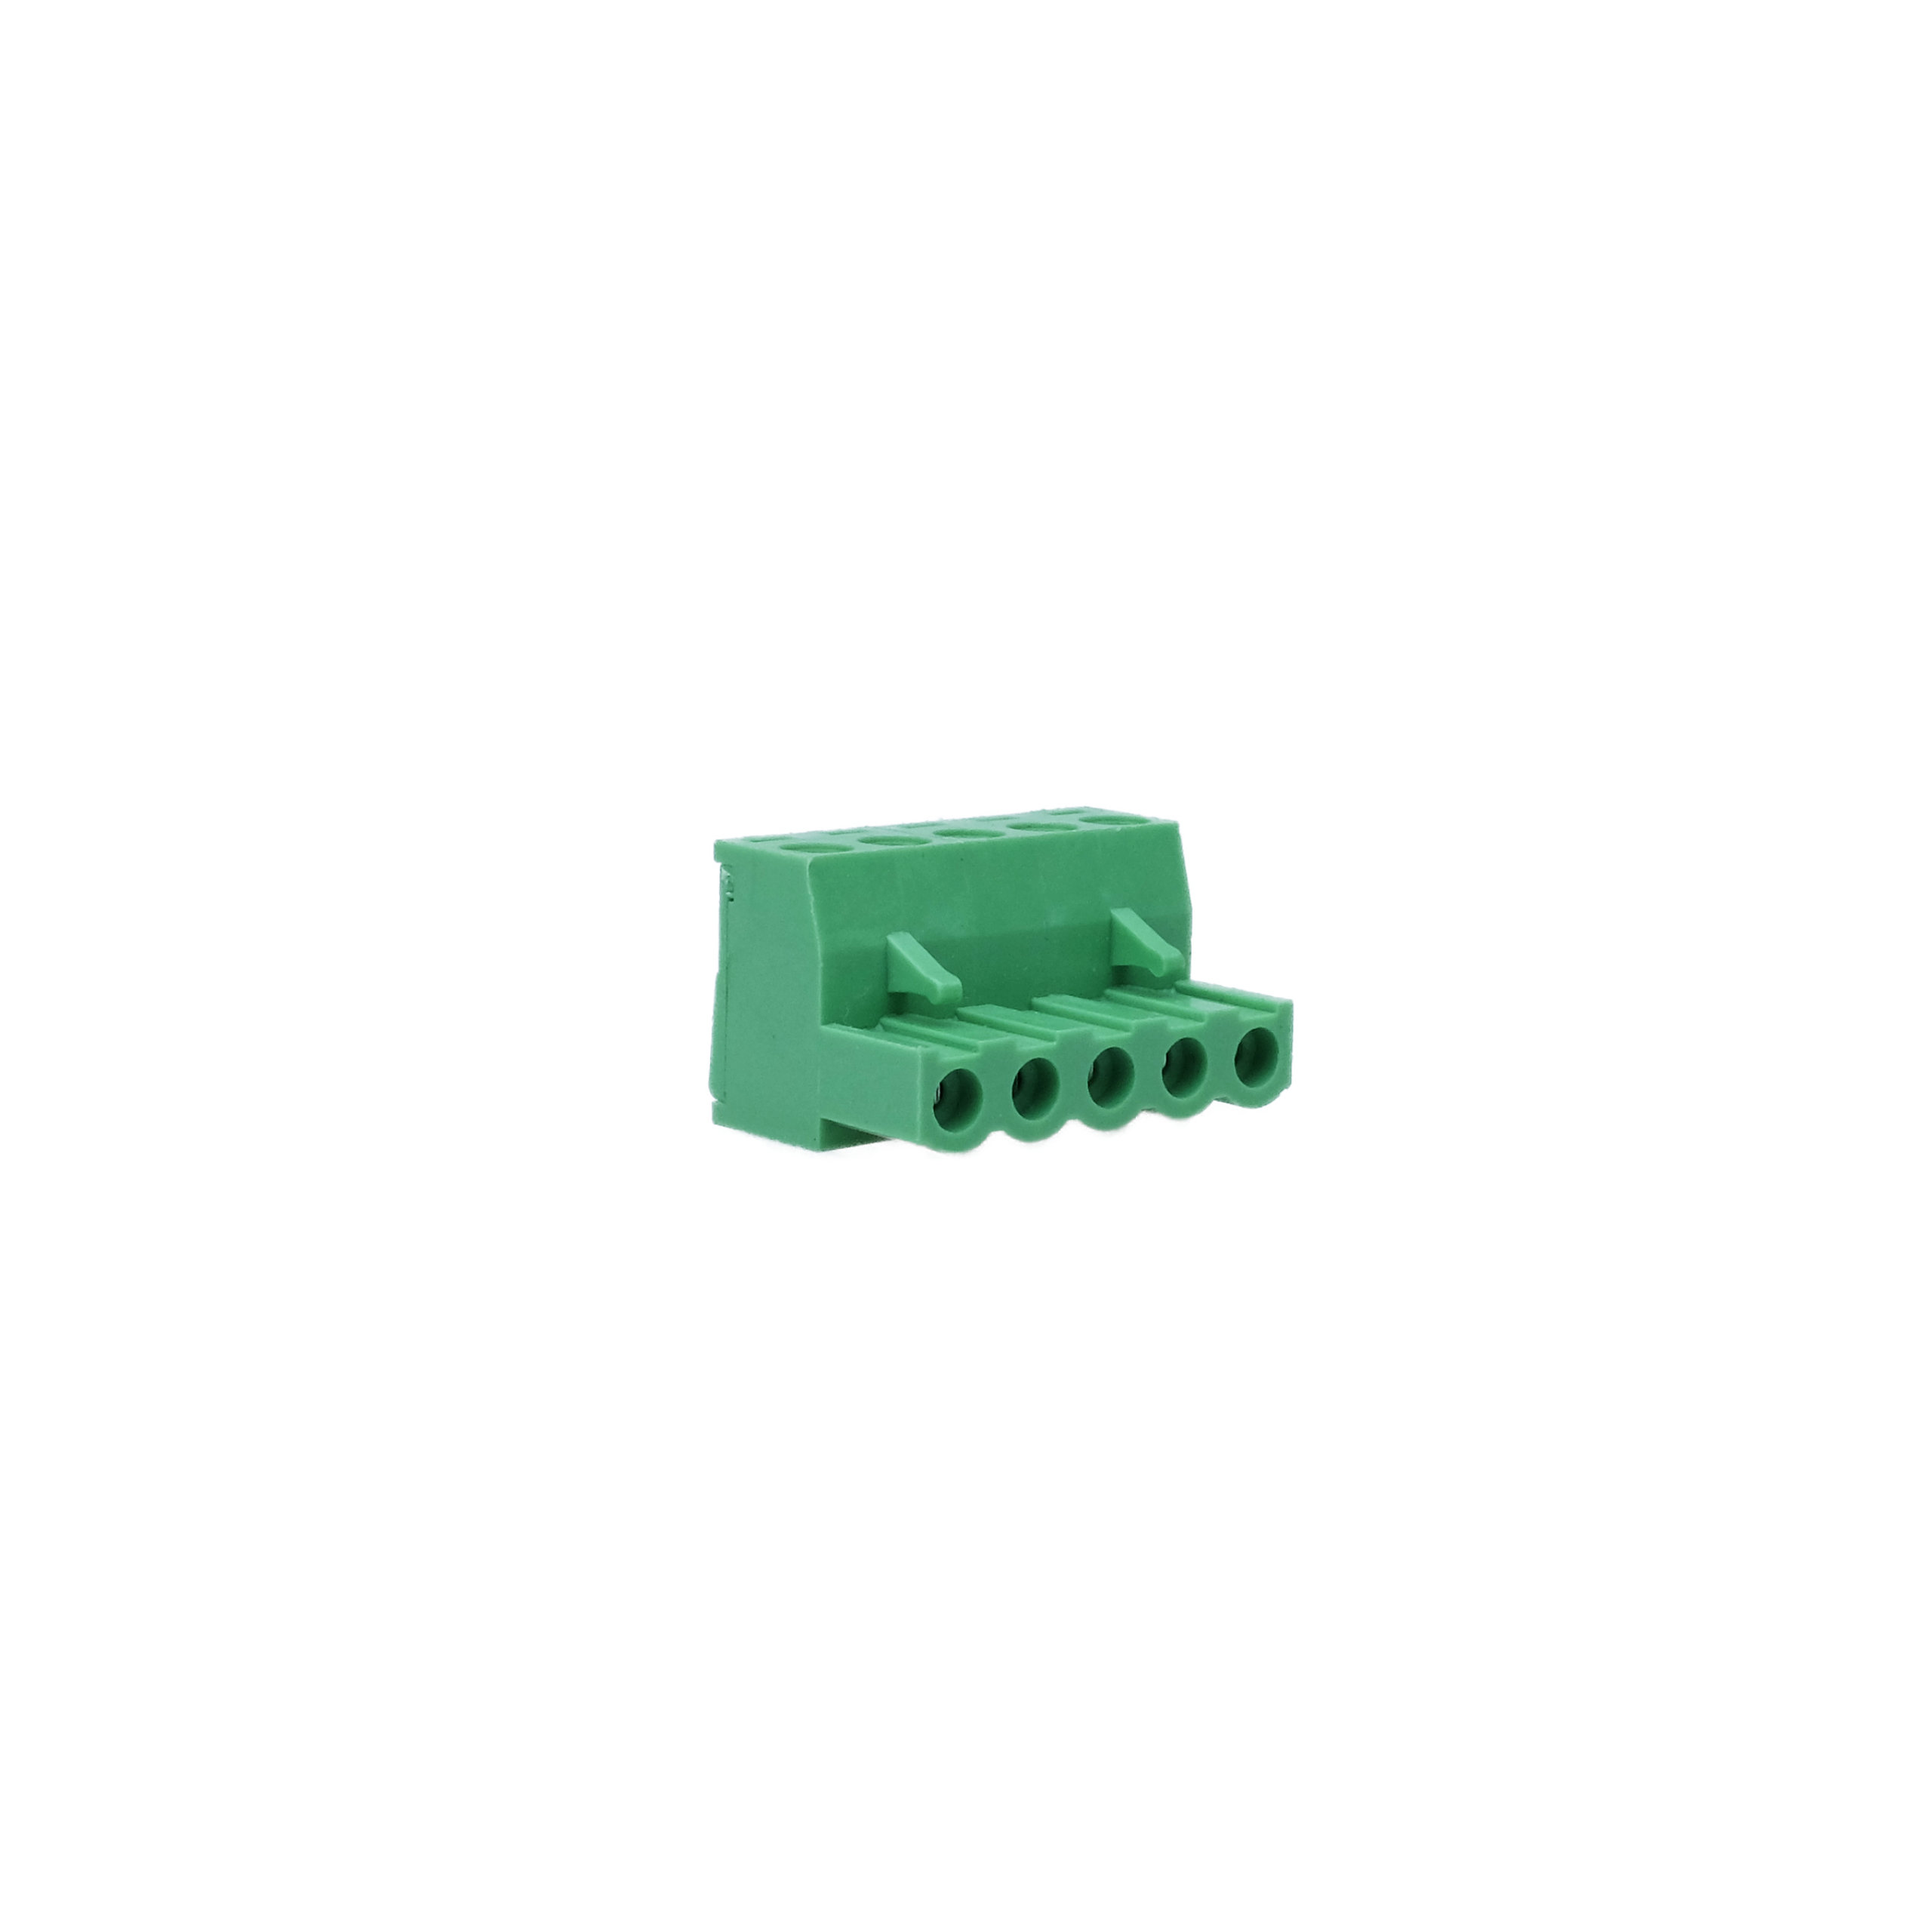 Phoenix Contact Connector MSTB 2.5/ 5-ST-5.08 5 pin 1757048